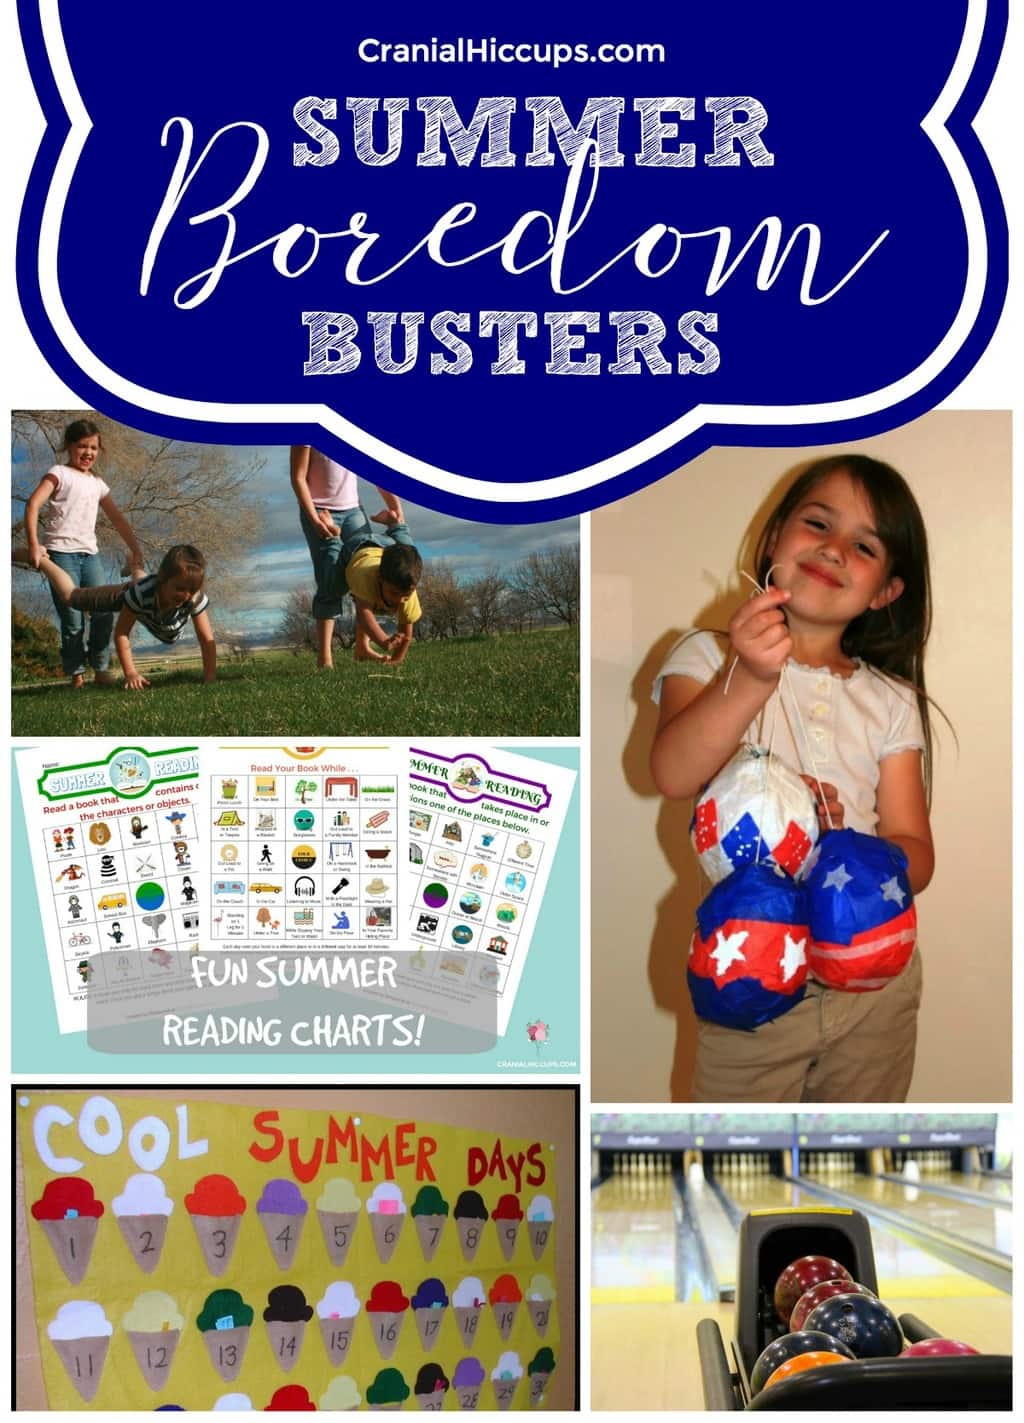 Summer Boredom Busters – Cranial Hiccups